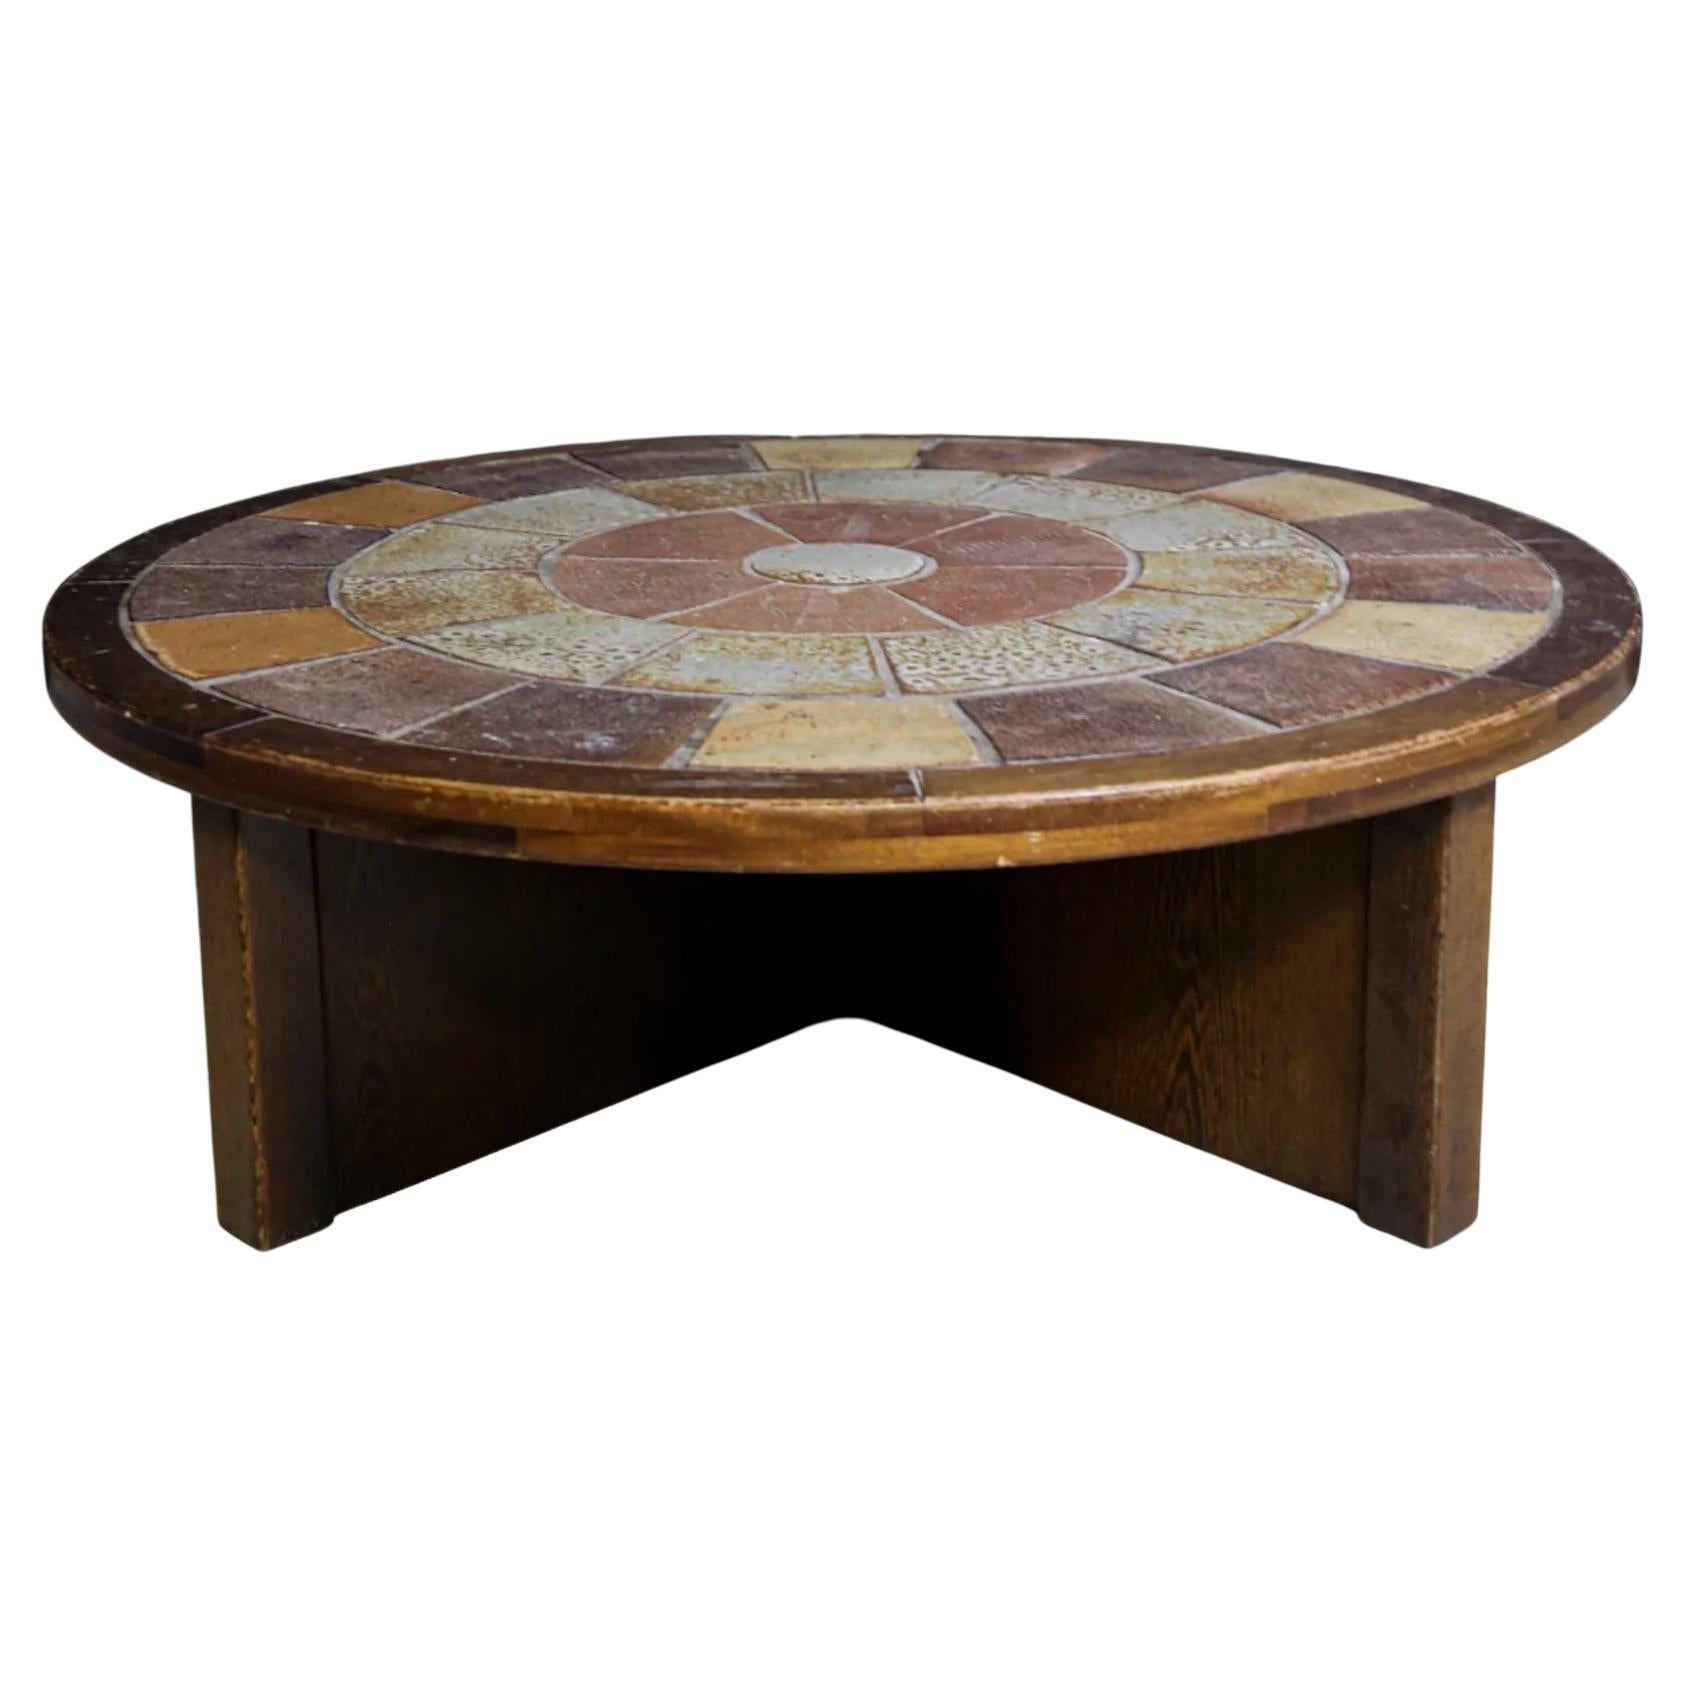 1960's French antique Coffee Table with Tile Inlay For Sale